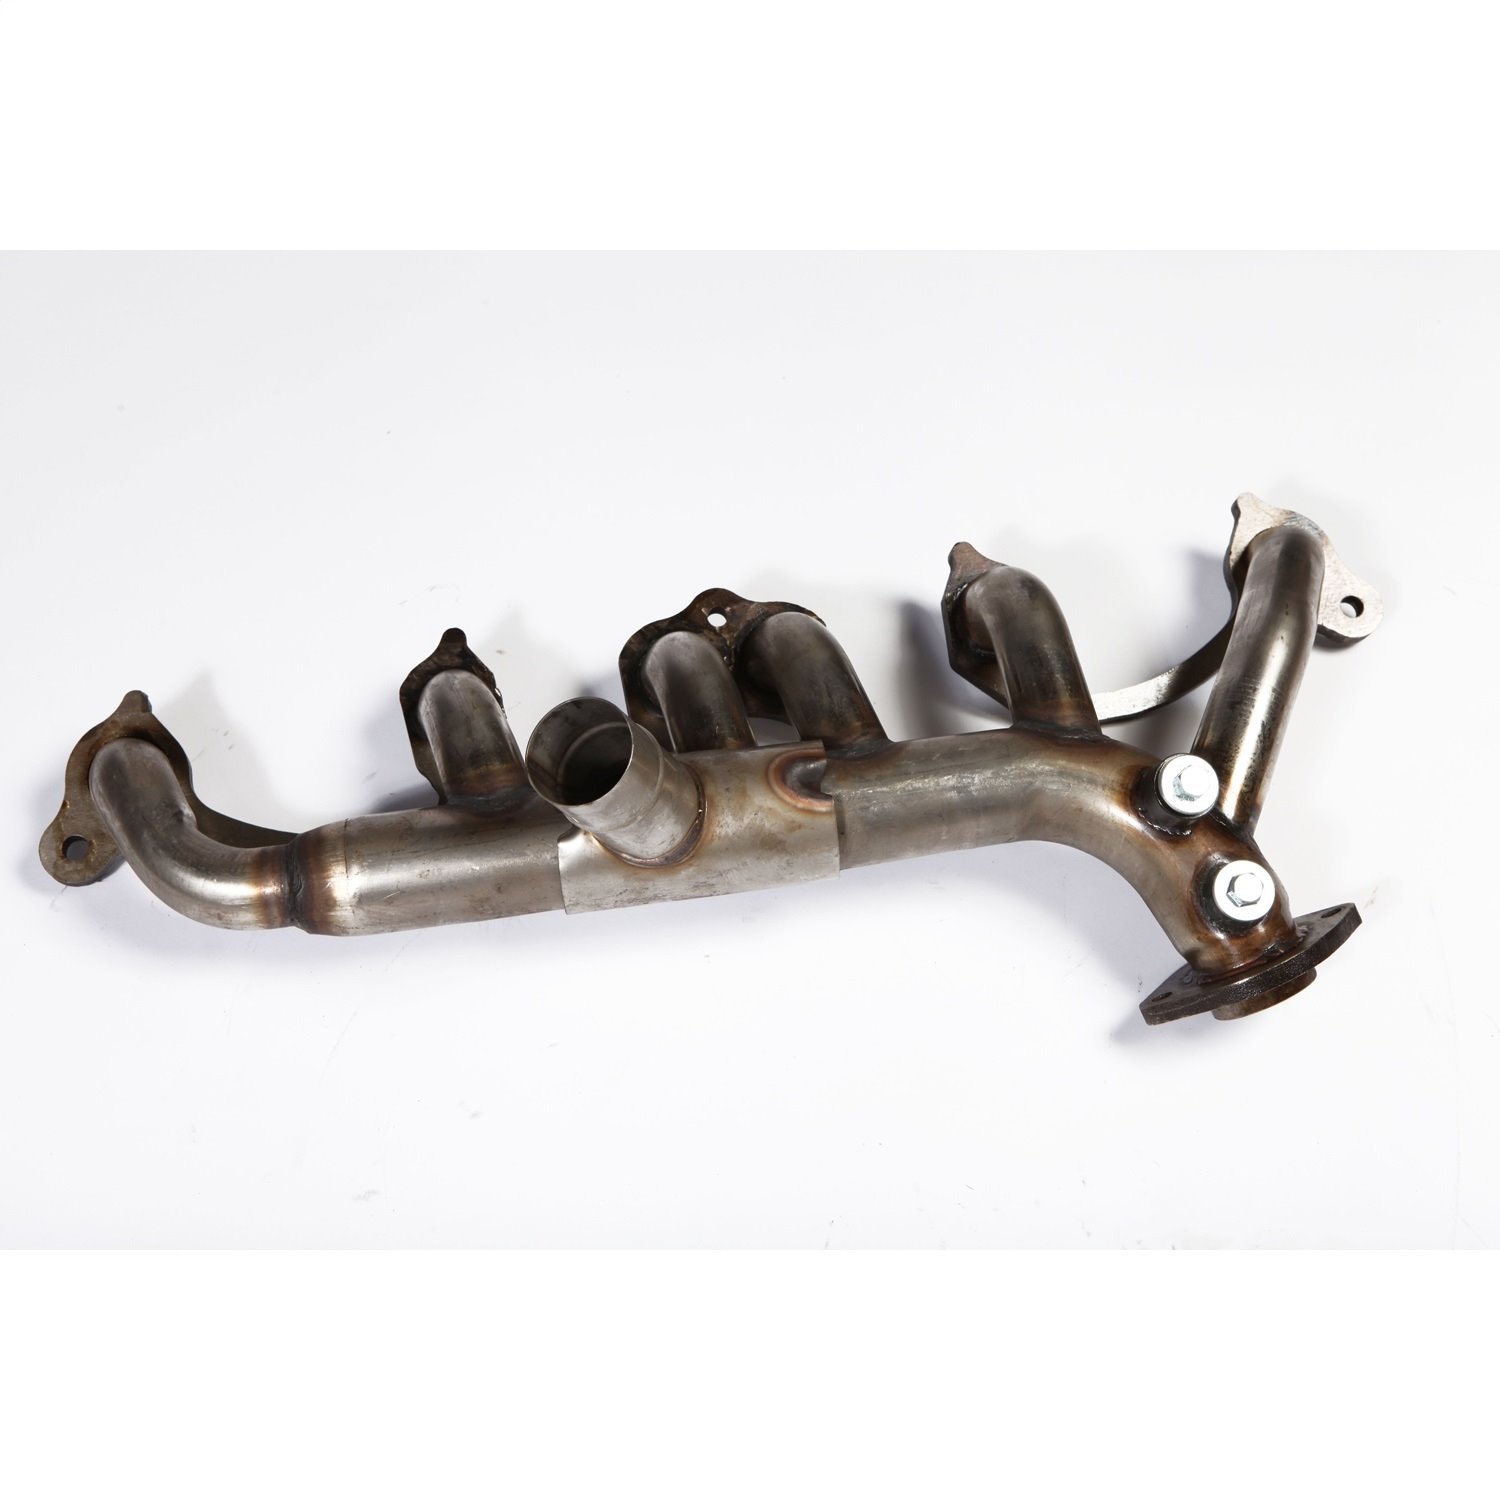 Replacement exhaust manifold from Omix-ADA, Fits 87-90 Cherokees